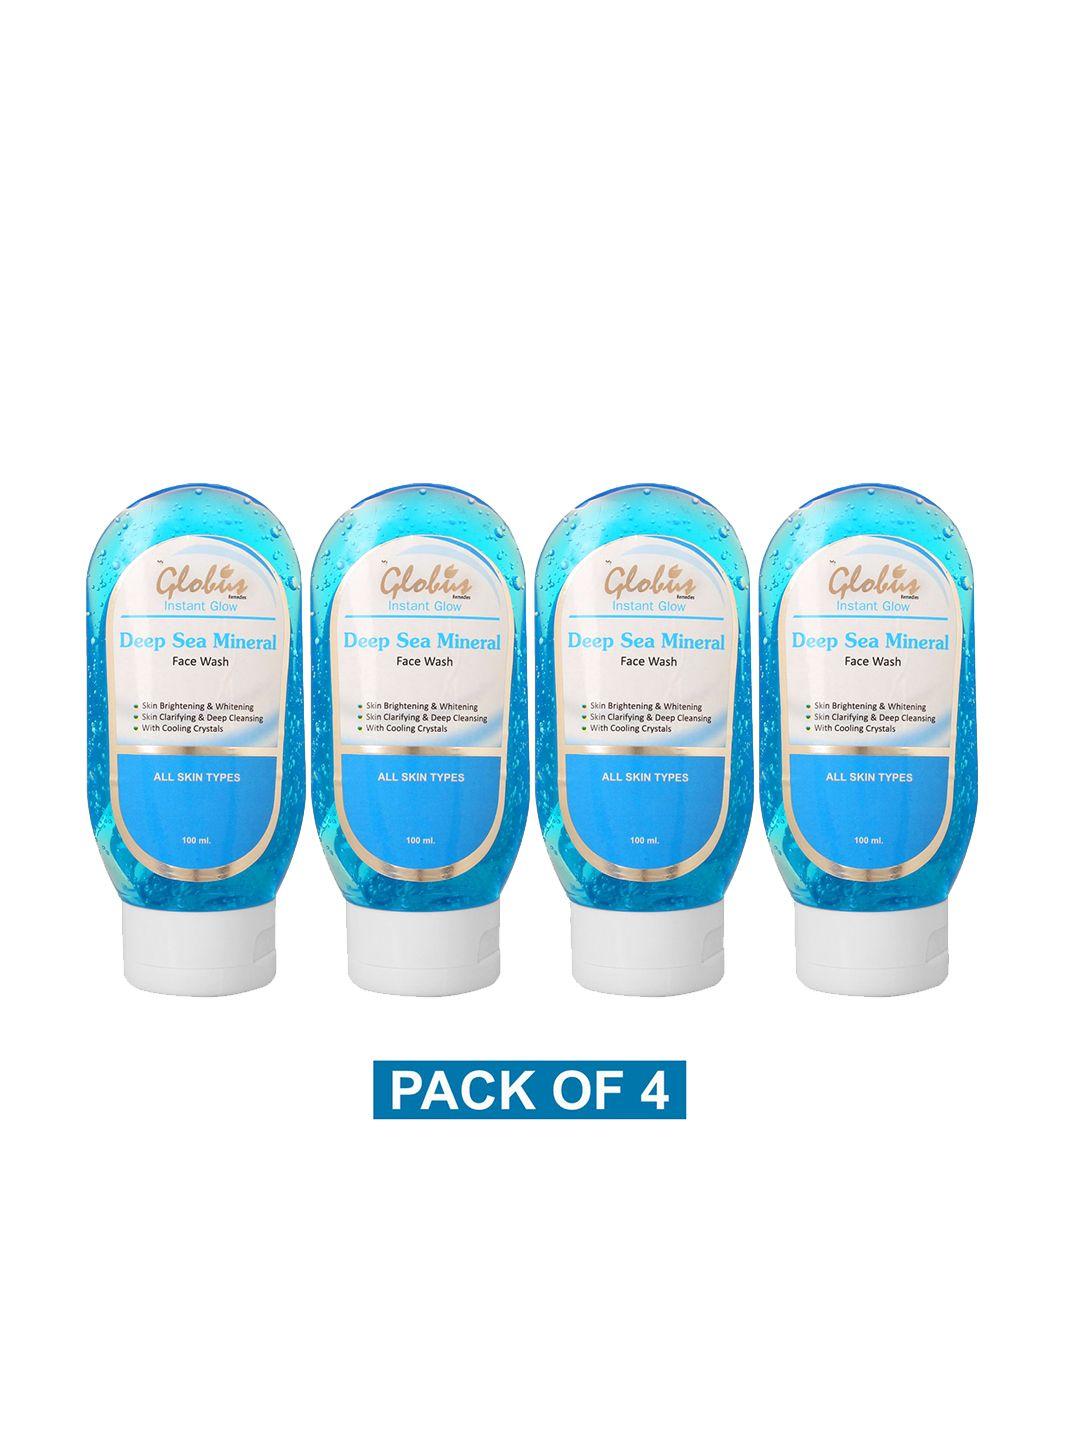 globus remedies set of 4 instant glow deep sea mineral face wash - 100 ml each